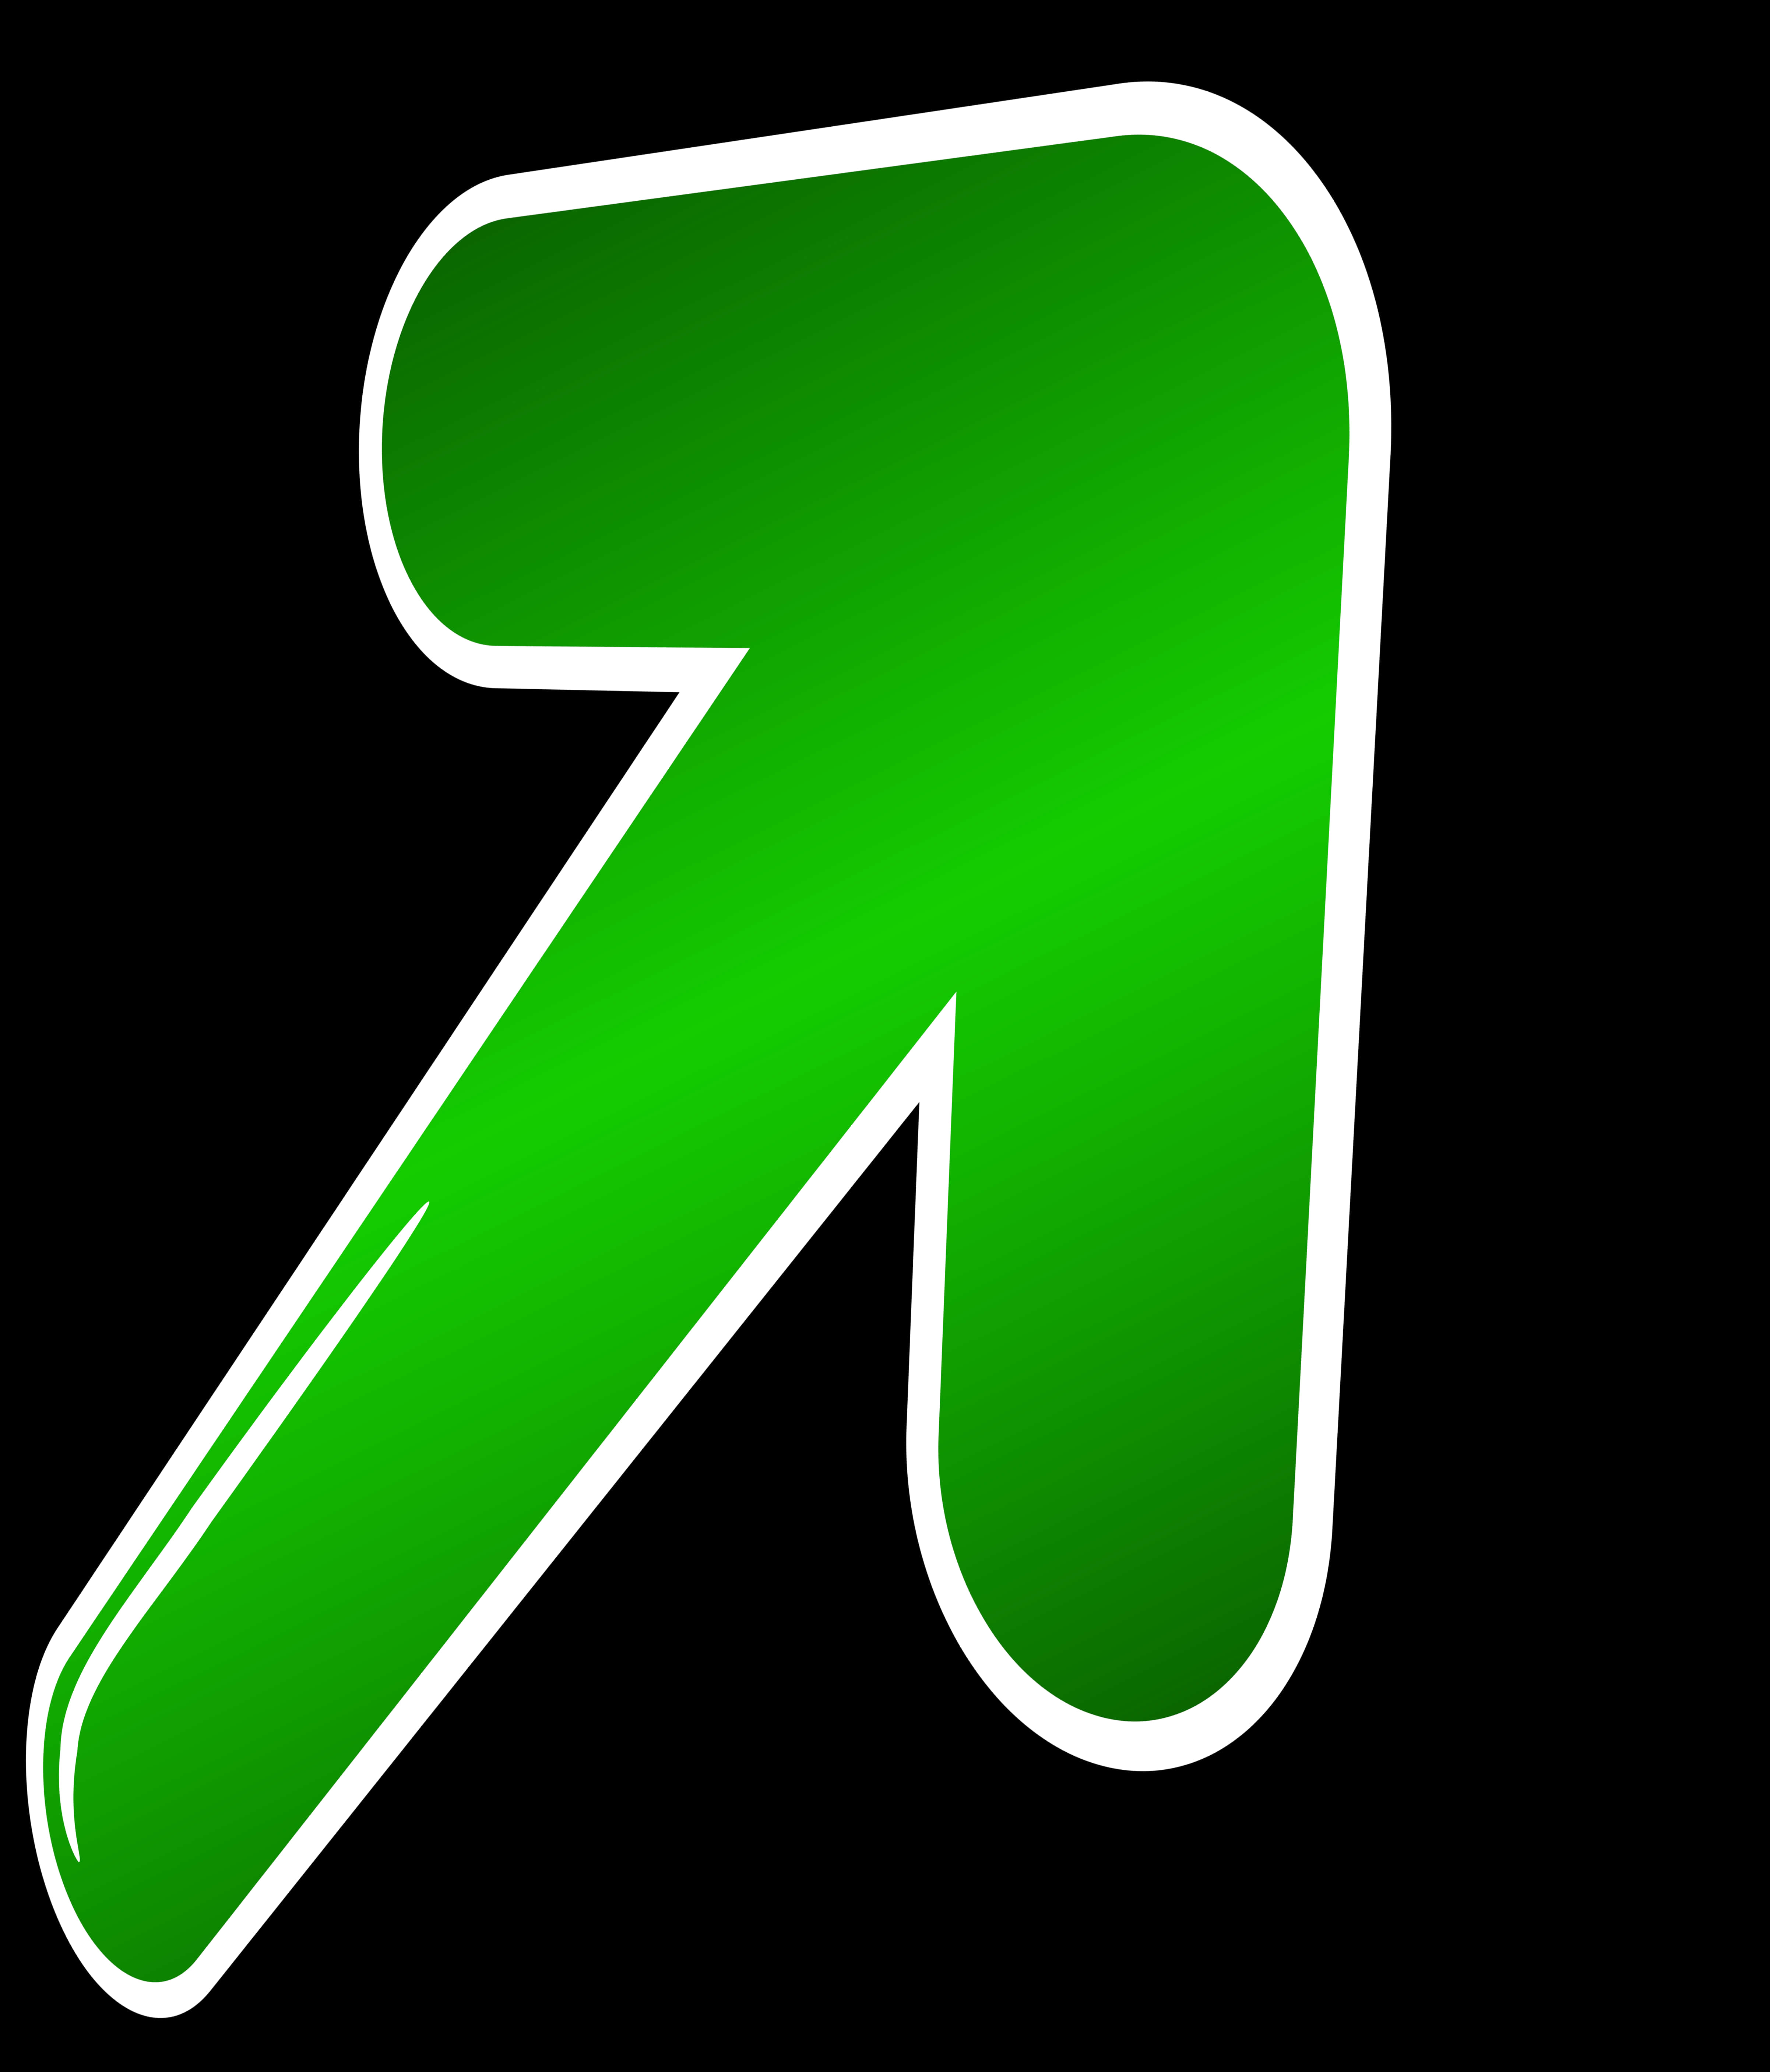 Green Curved Arrow Graphic